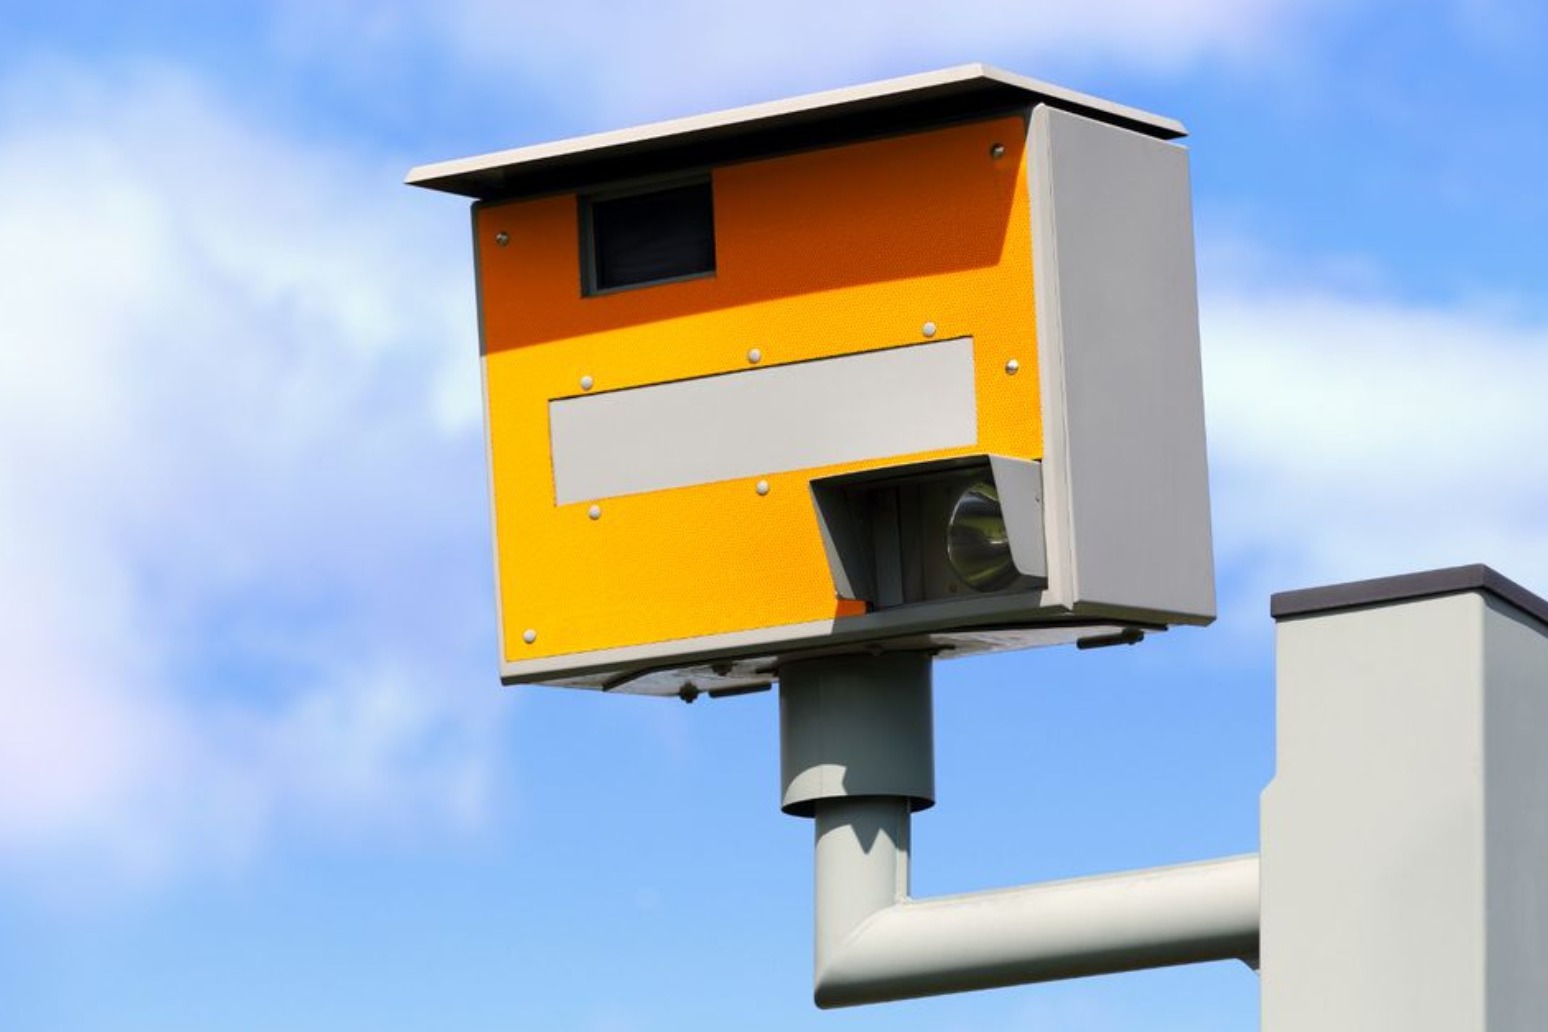 Vast majority of motorists want speed cameras to check tax, insurance and MOT, study finds 